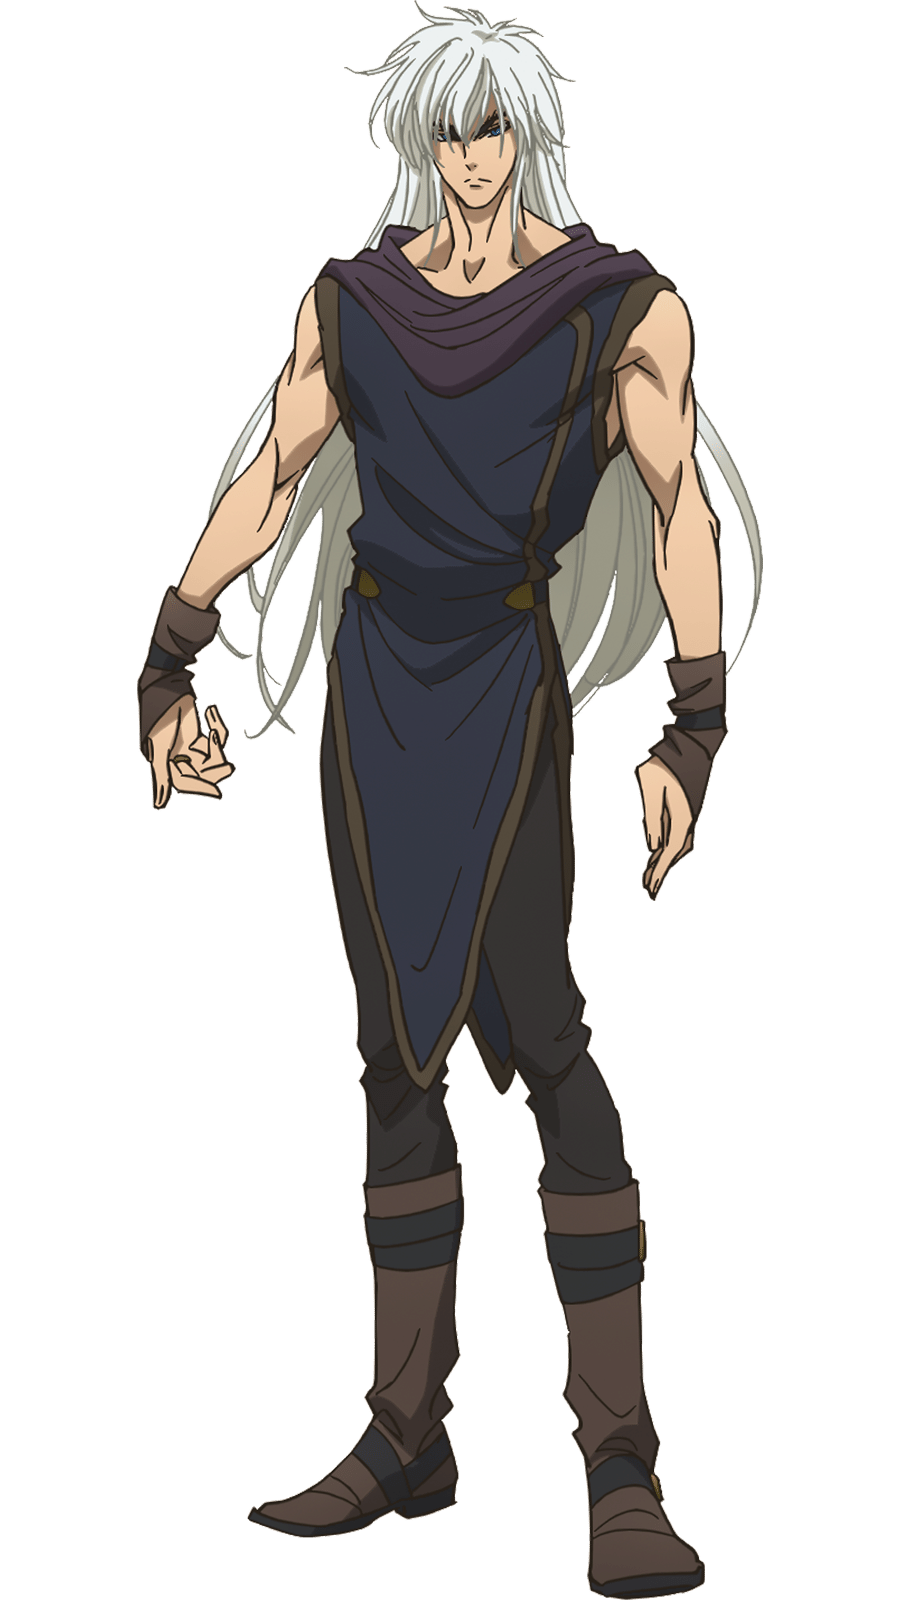 prompthunt black hair red eyes anime male sangromancy wizard Angra Mainyu  in style of Granblue Fantasy in style of Fate Grand Order beautiful cell  shading by ufotable